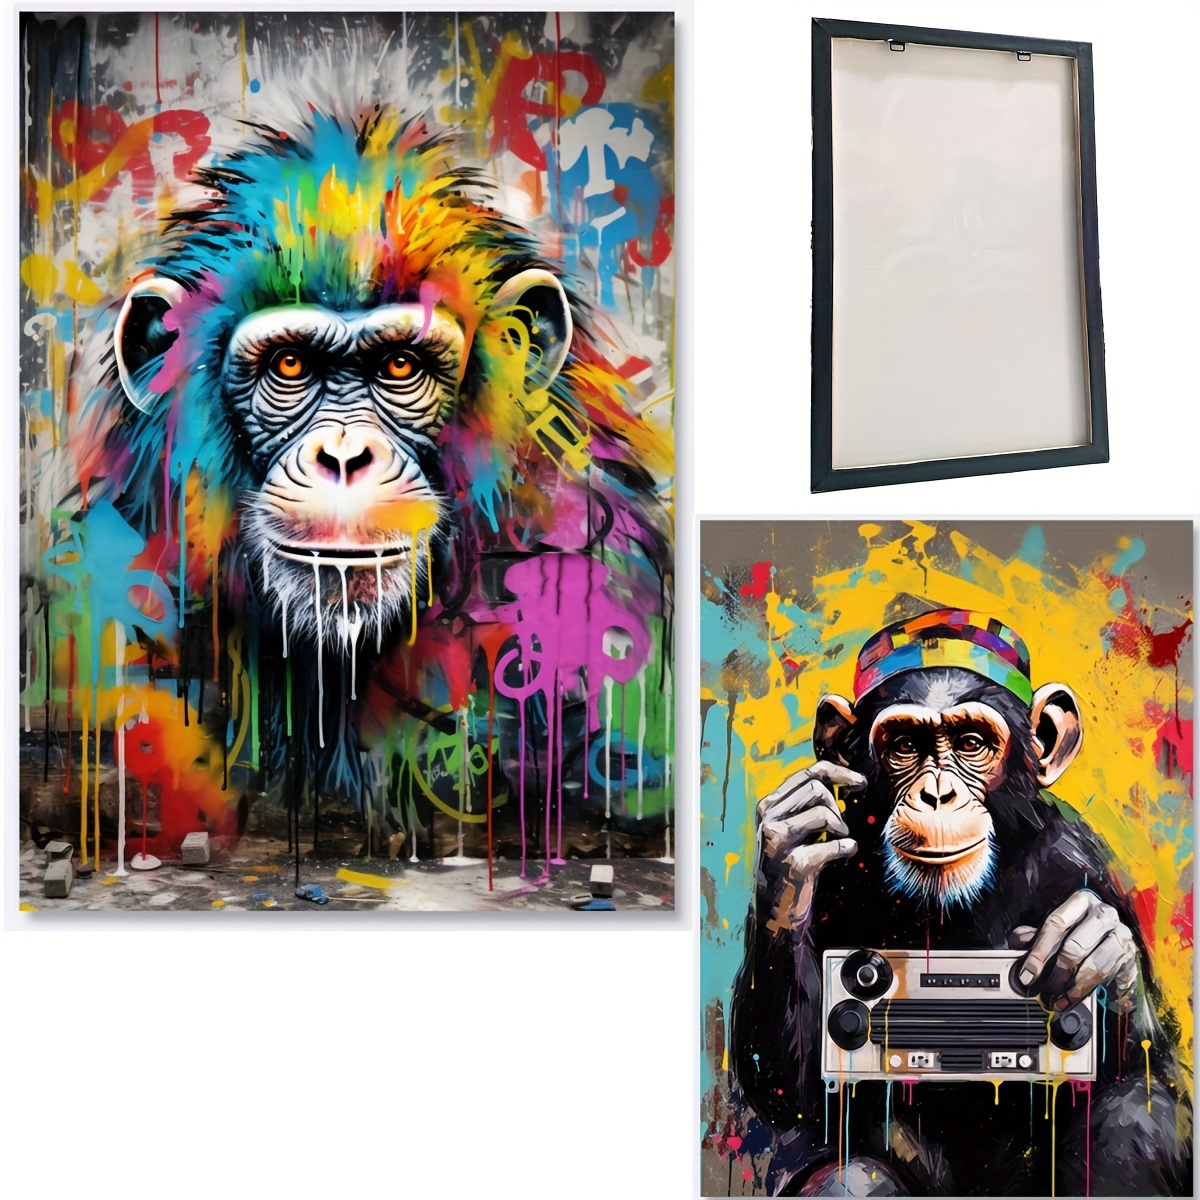 Banksy Wall Art Monkey,Follow Your Dreams Poster,Inspirational Quotes  Posters,Graffiti Canvas Painting Gorilla Poster Modern Pop Art Wall Decor  for